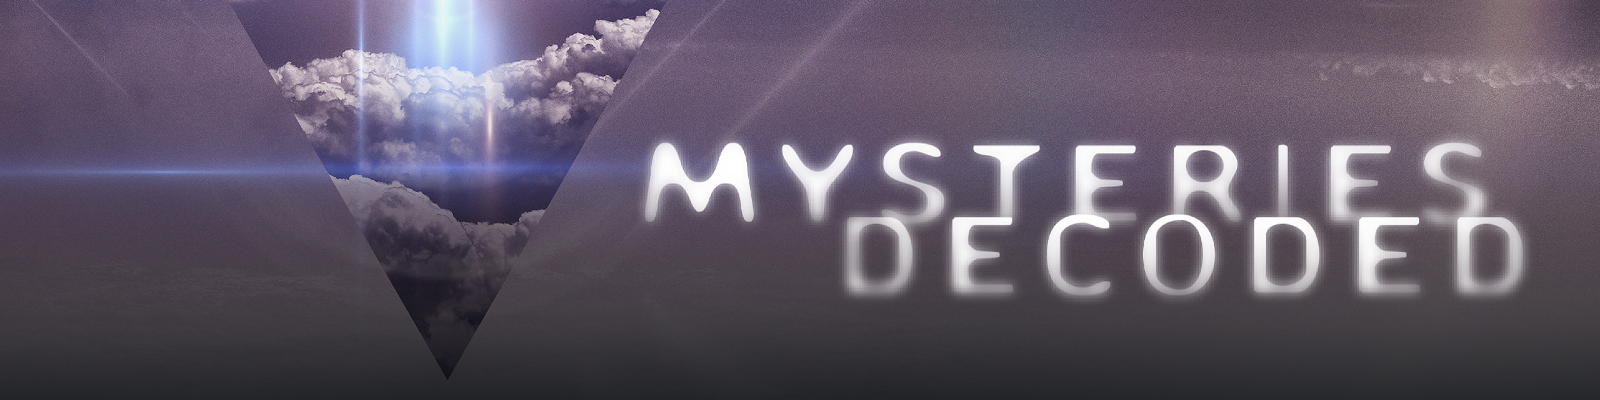 Mysteries Decoded Banner